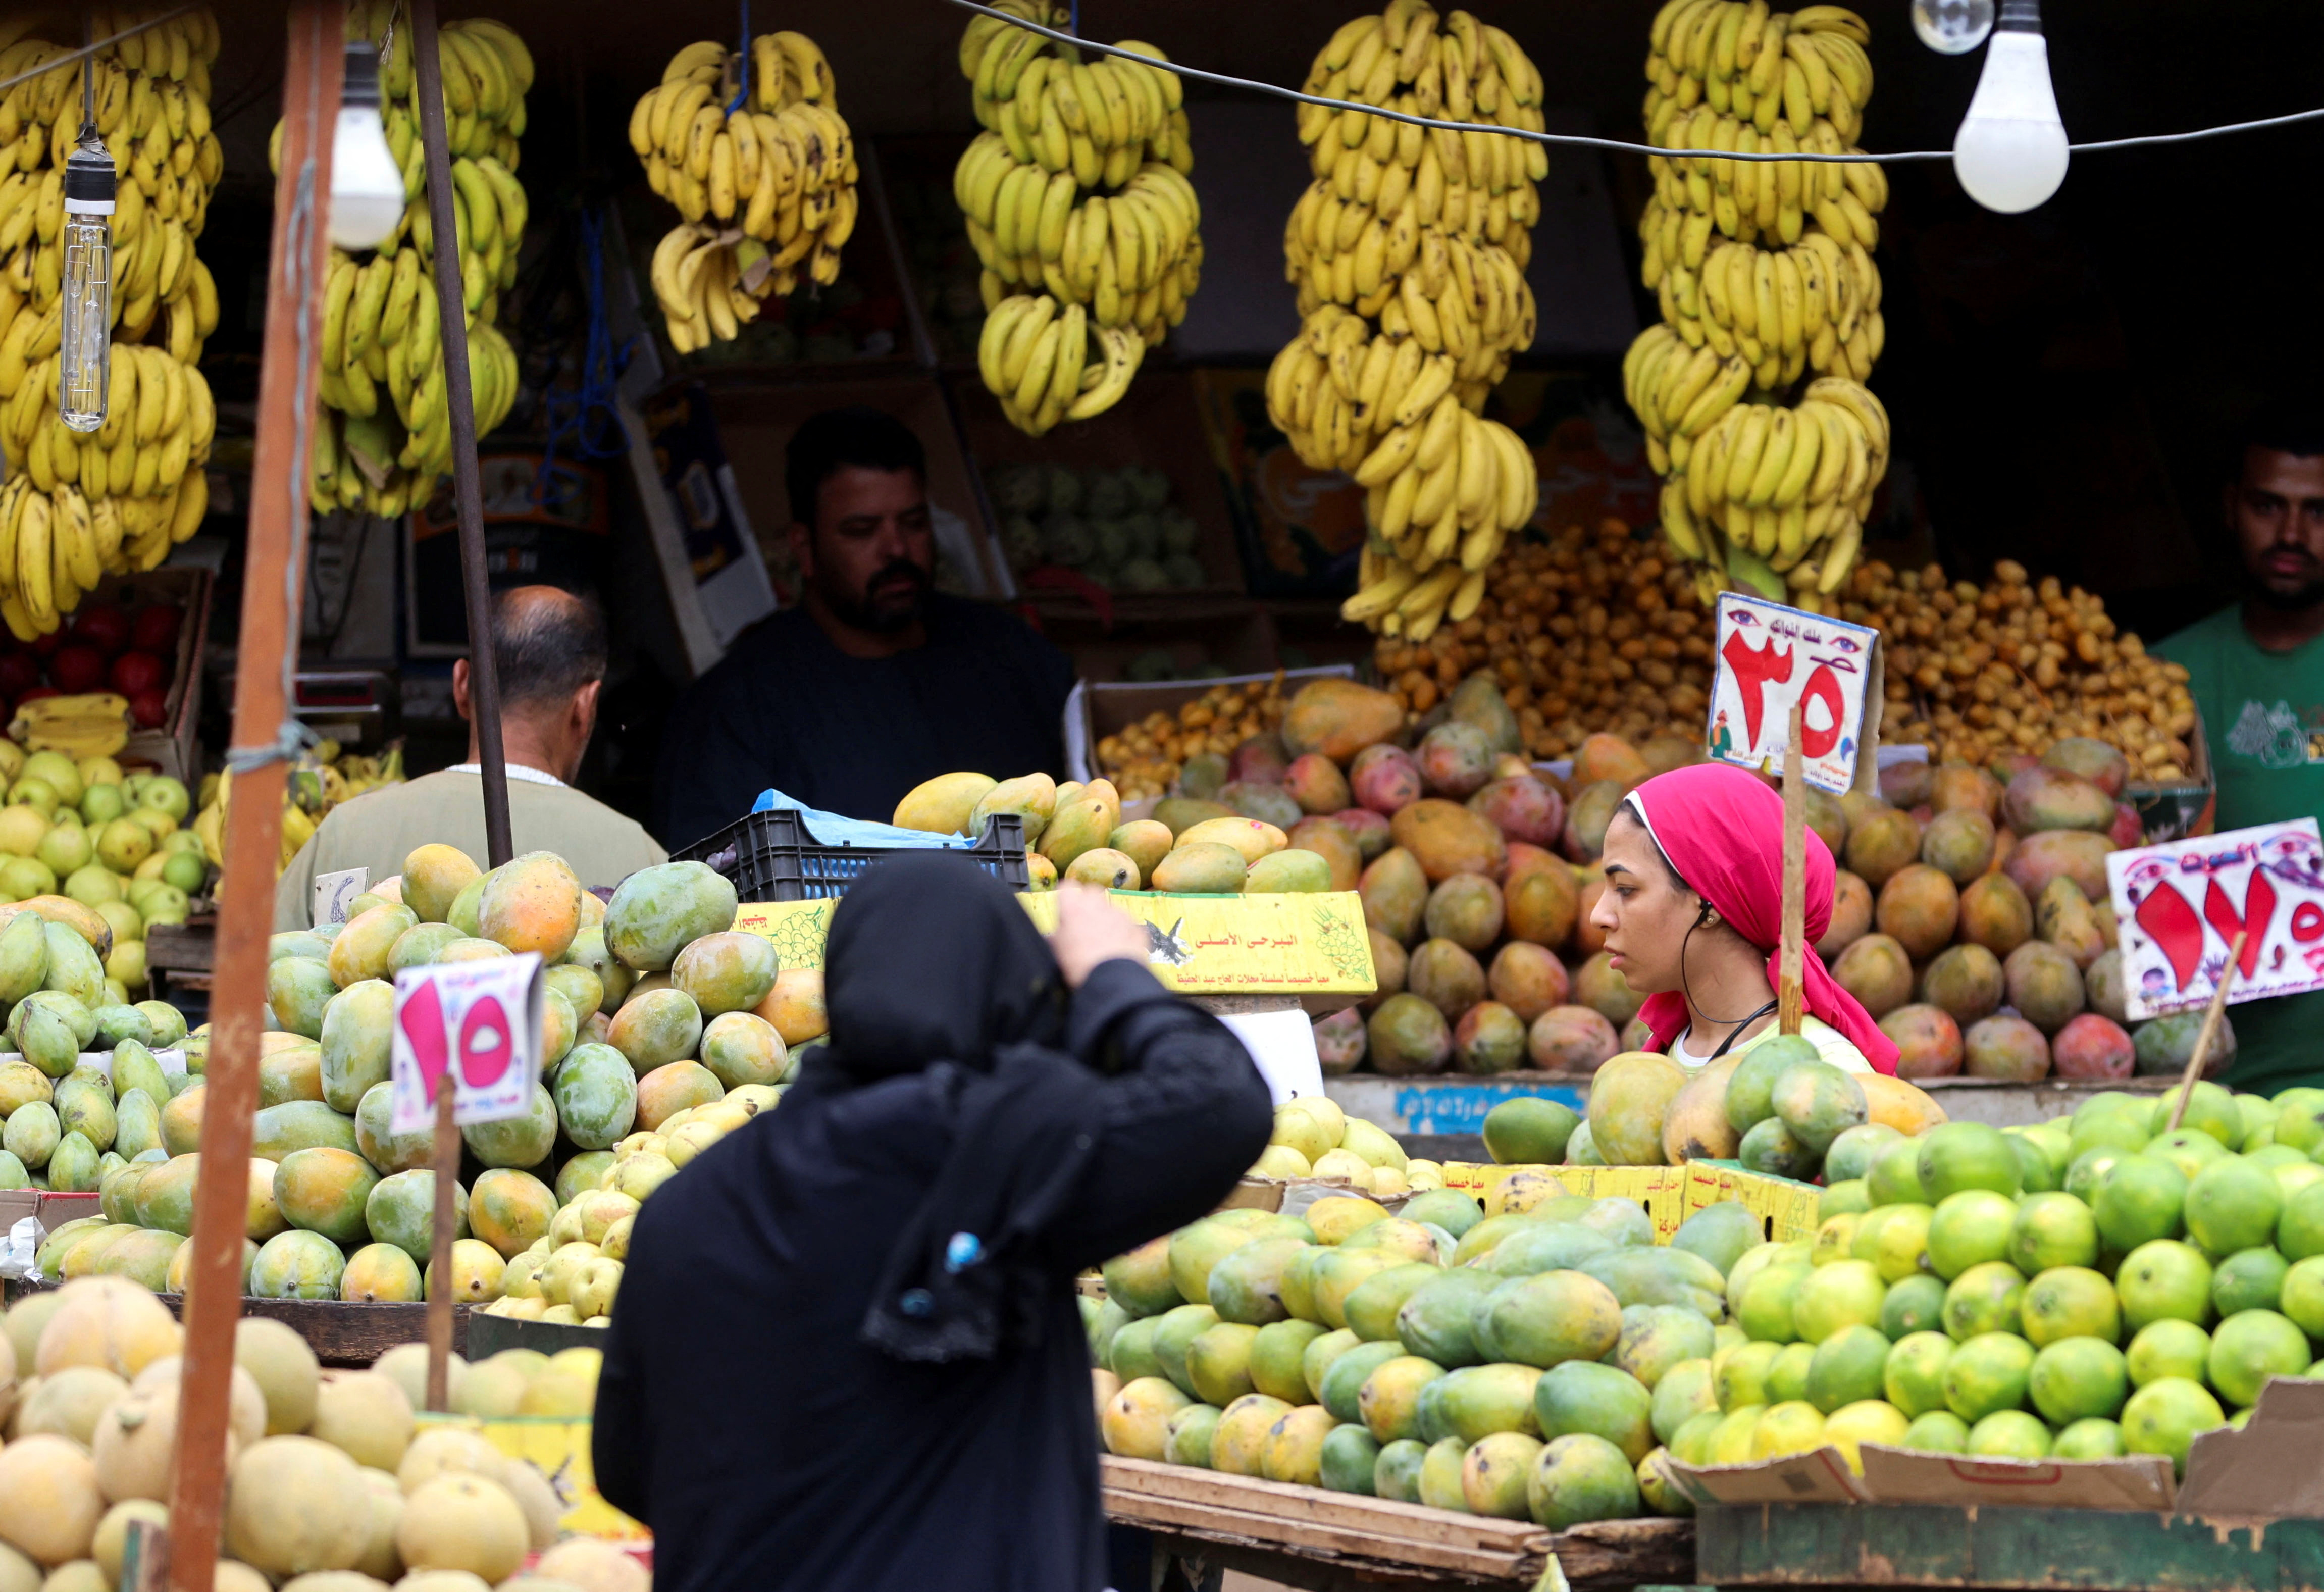 A woman shops at a vegetable and fruits market in Cairo